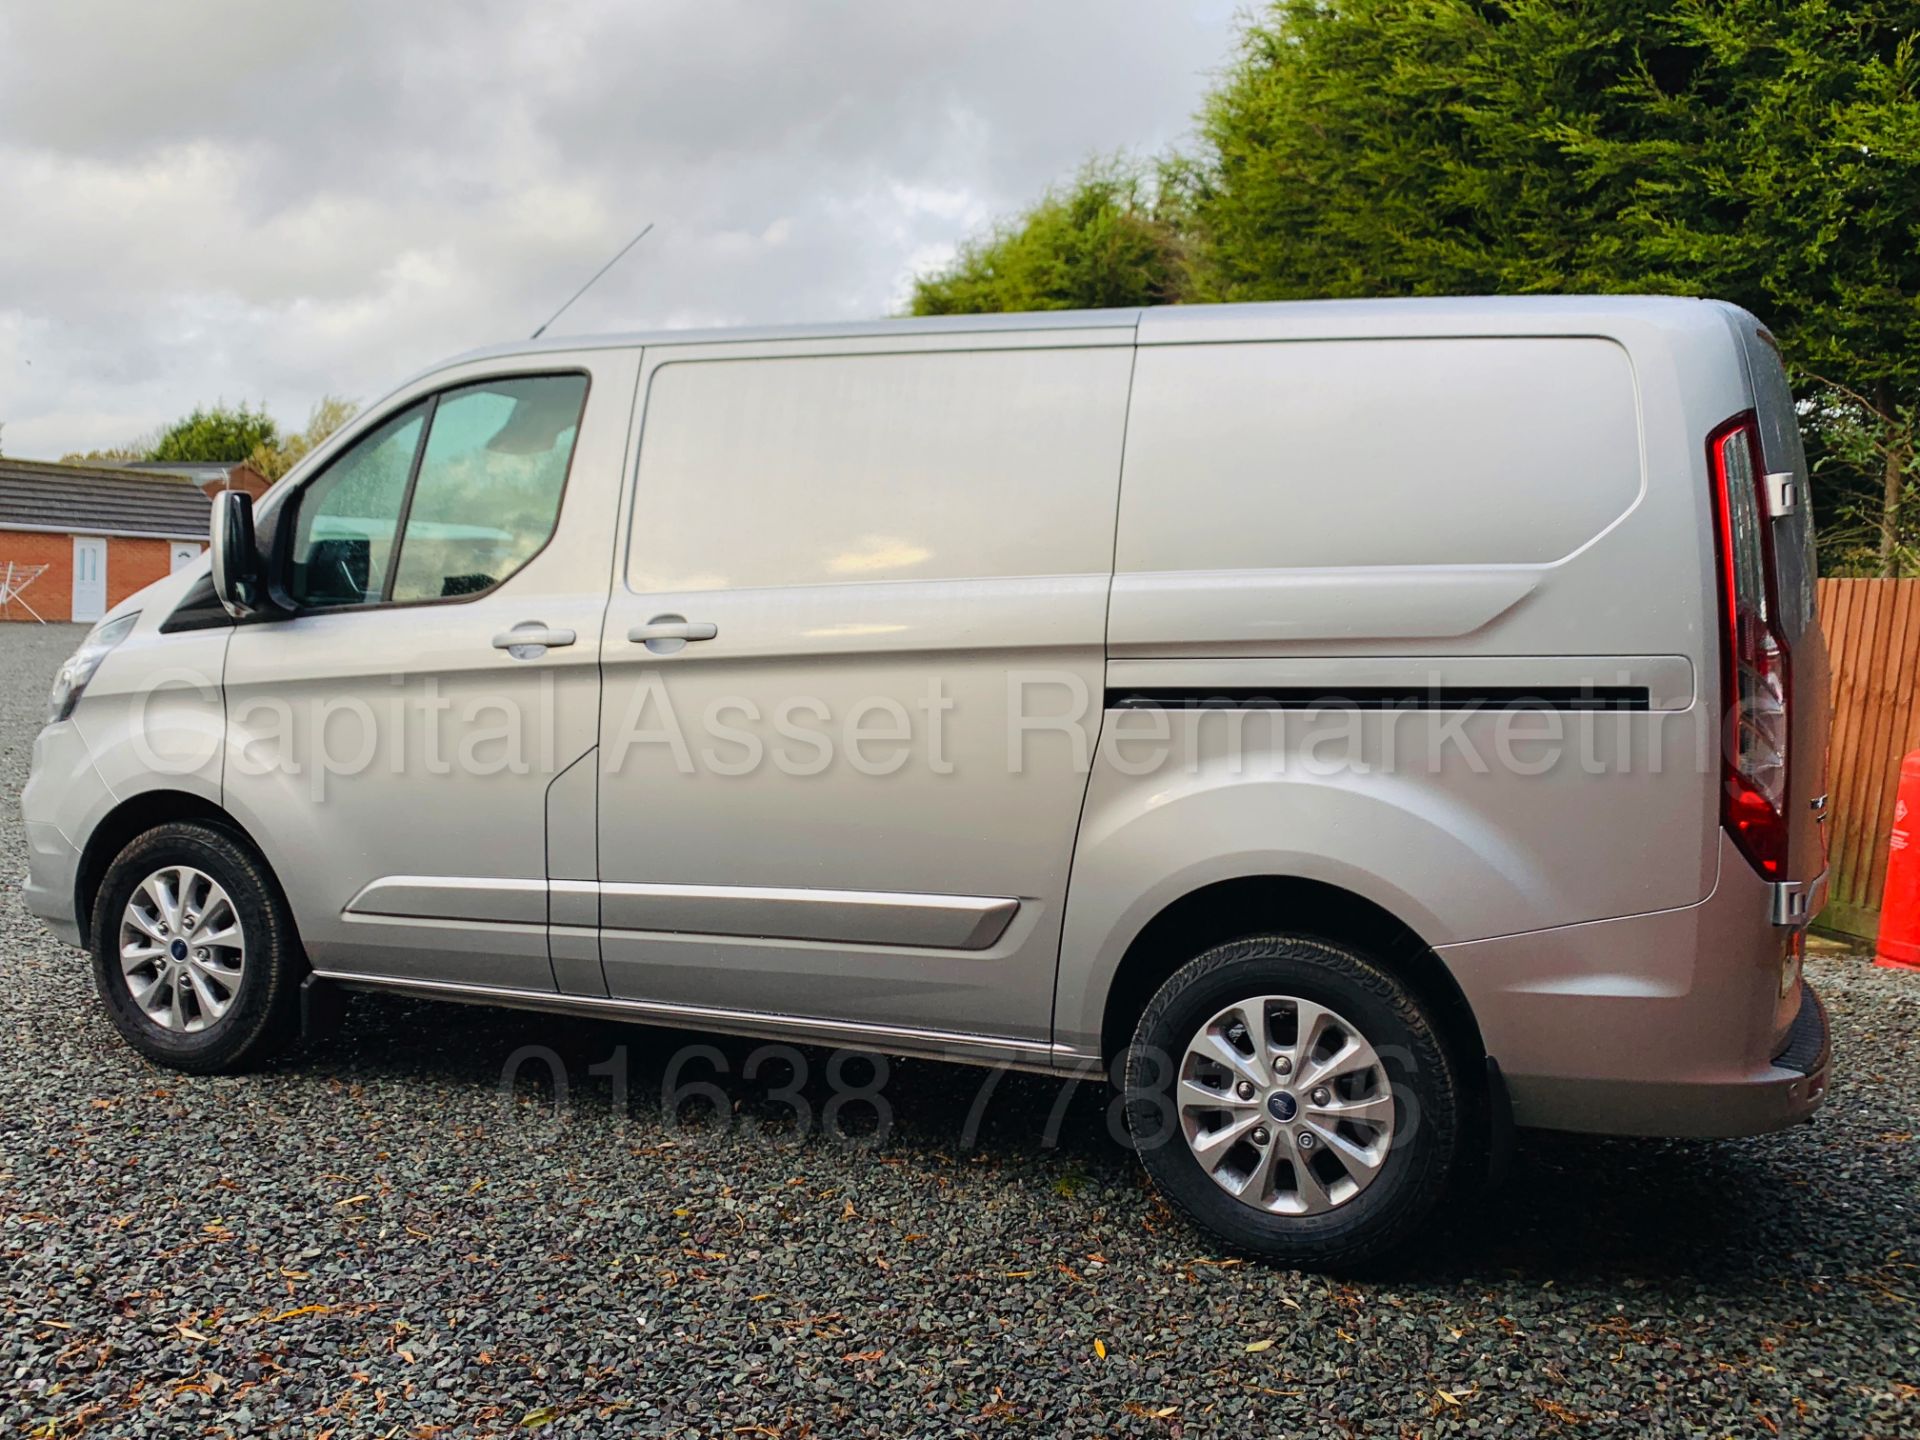 FORD TRANSIT CUSTOM *LIMITED EDTION* (2018 - 68 REG) '2.0 TDCI - 130 BHP - 6 SPEED' *ALL NEW MODEL* - Image 9 of 51